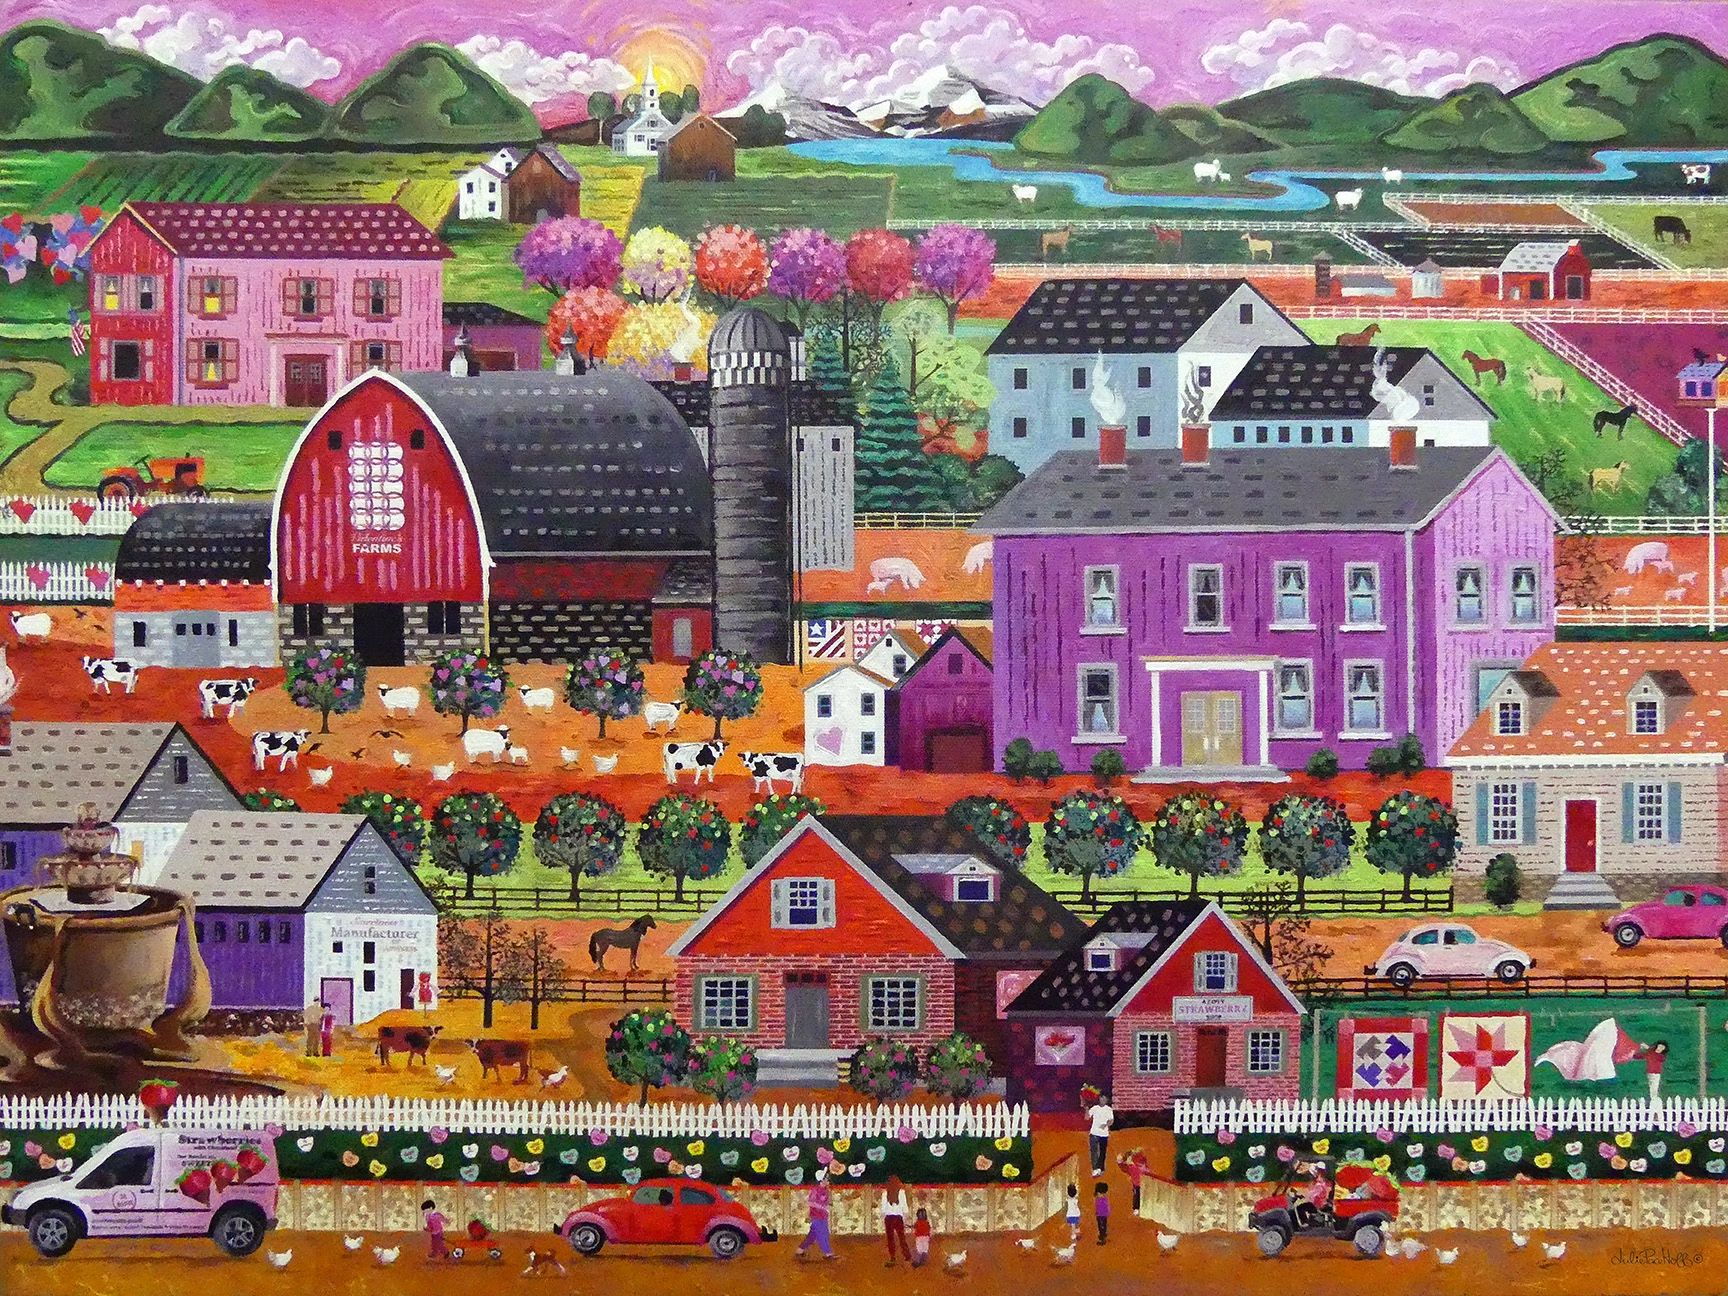 Valentine's Farm has chocolate, cows, strawberries, pink, red, and love. Inspired by Charles Wysocki